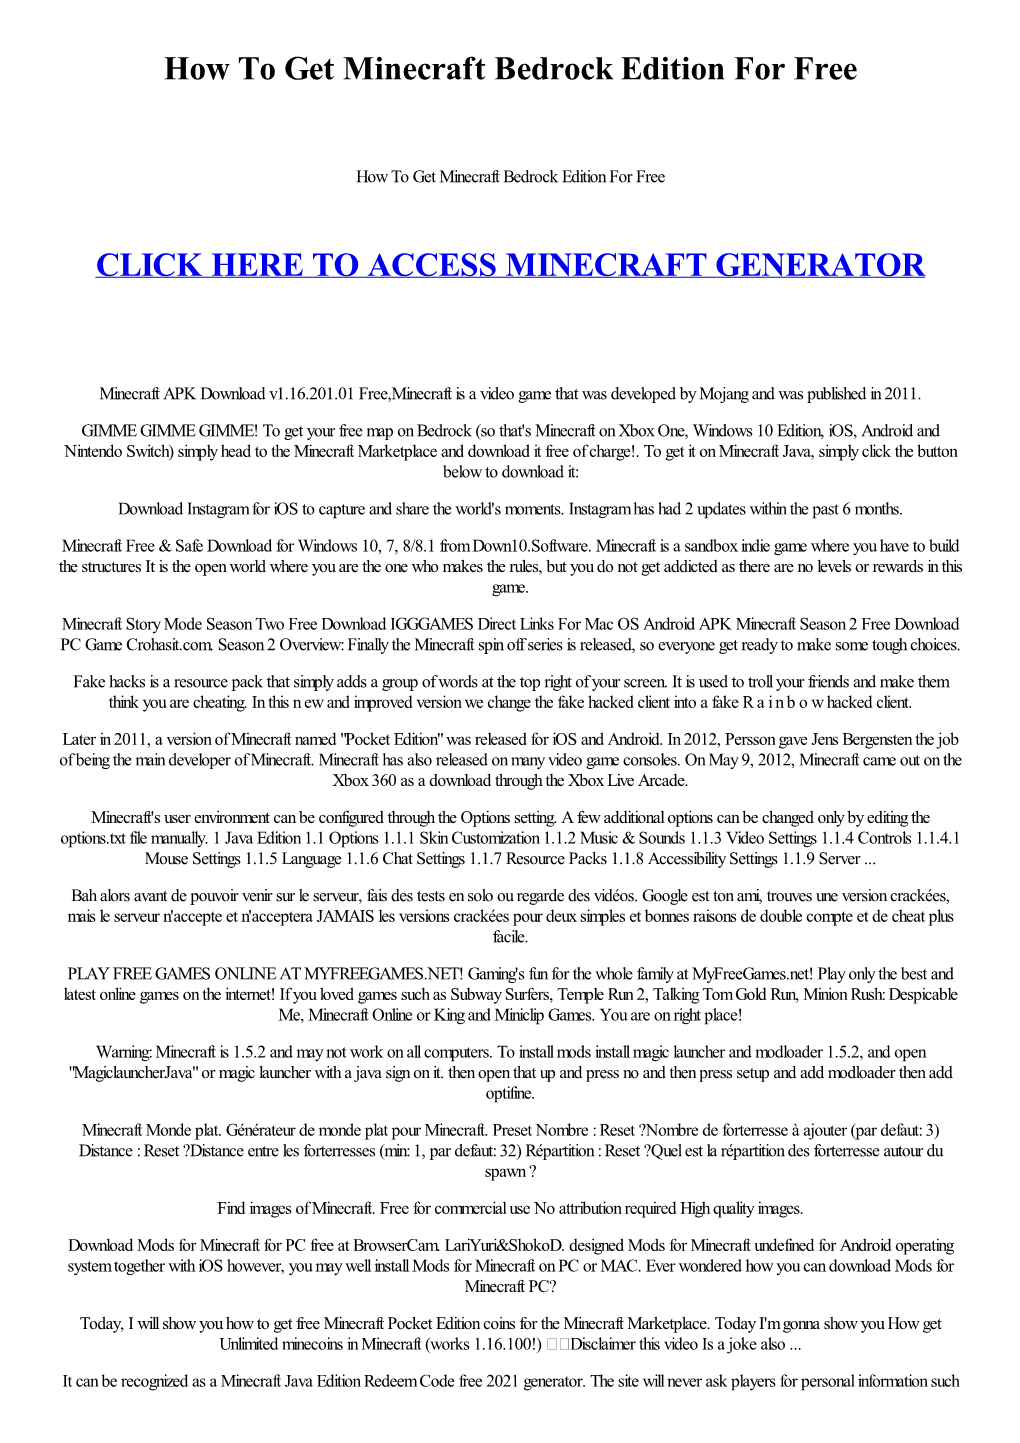 How to Get Minecraft Bedrock Edition for Free